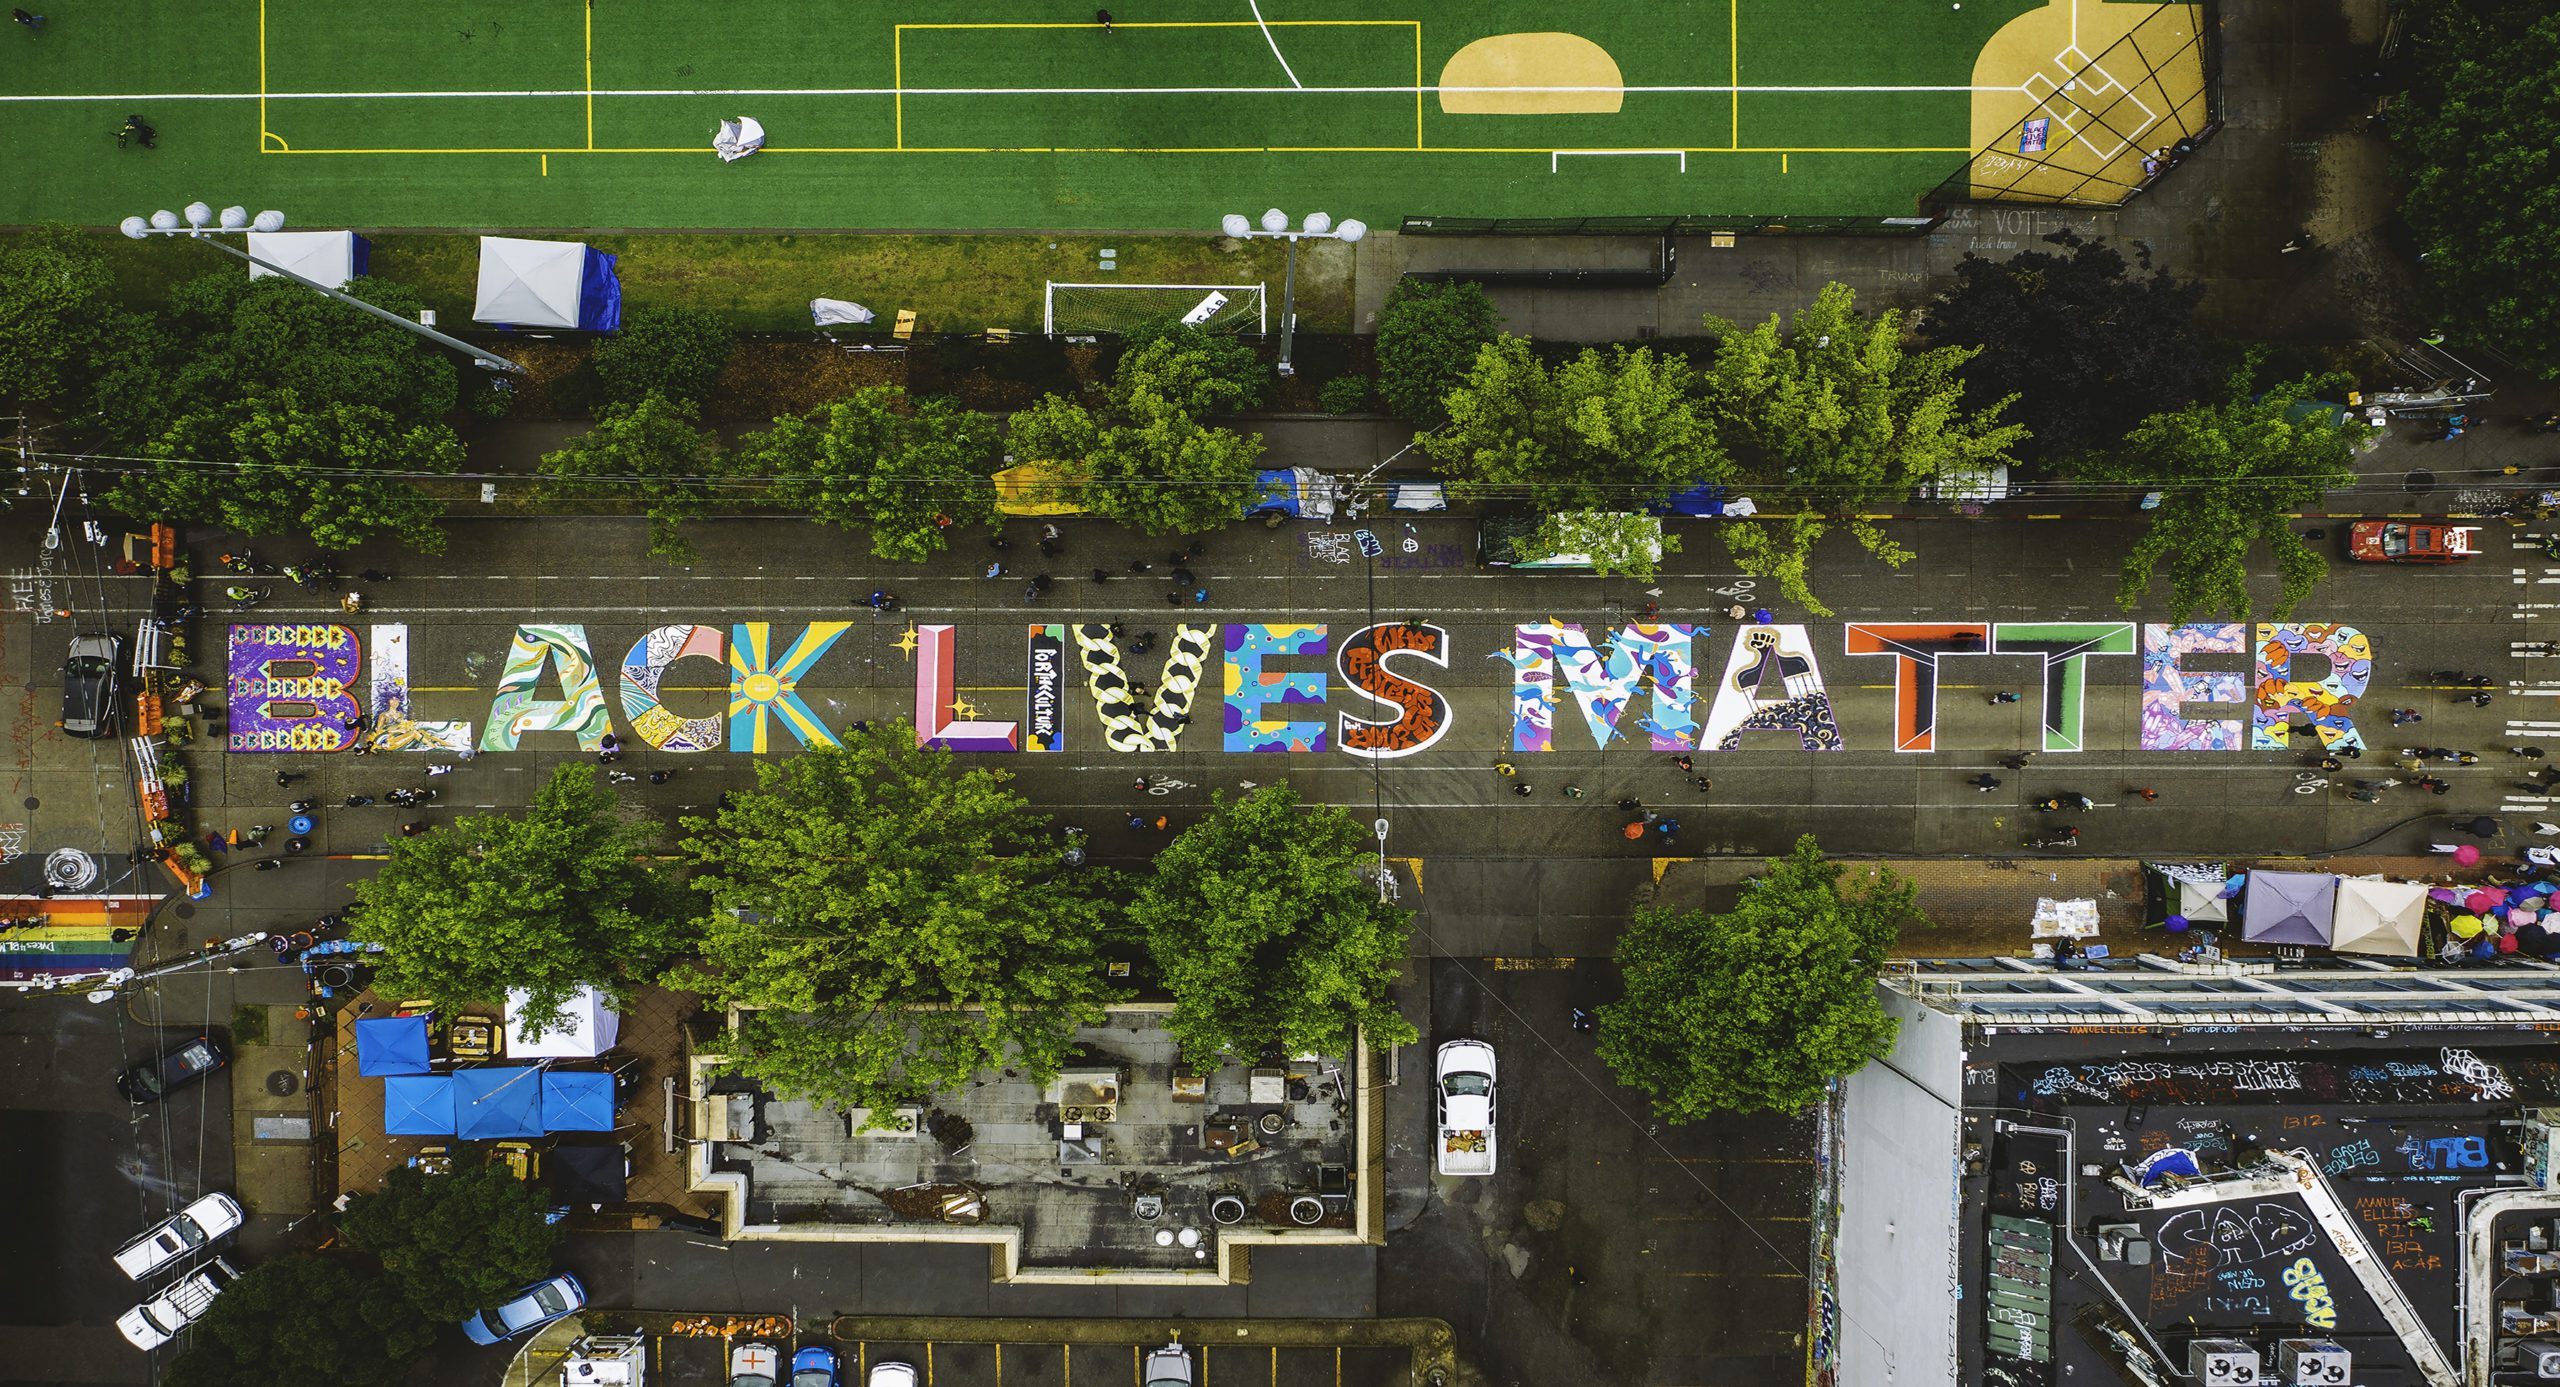 Drone shot of the Black Lives Matter mural on the street rendered in colorful block letters.